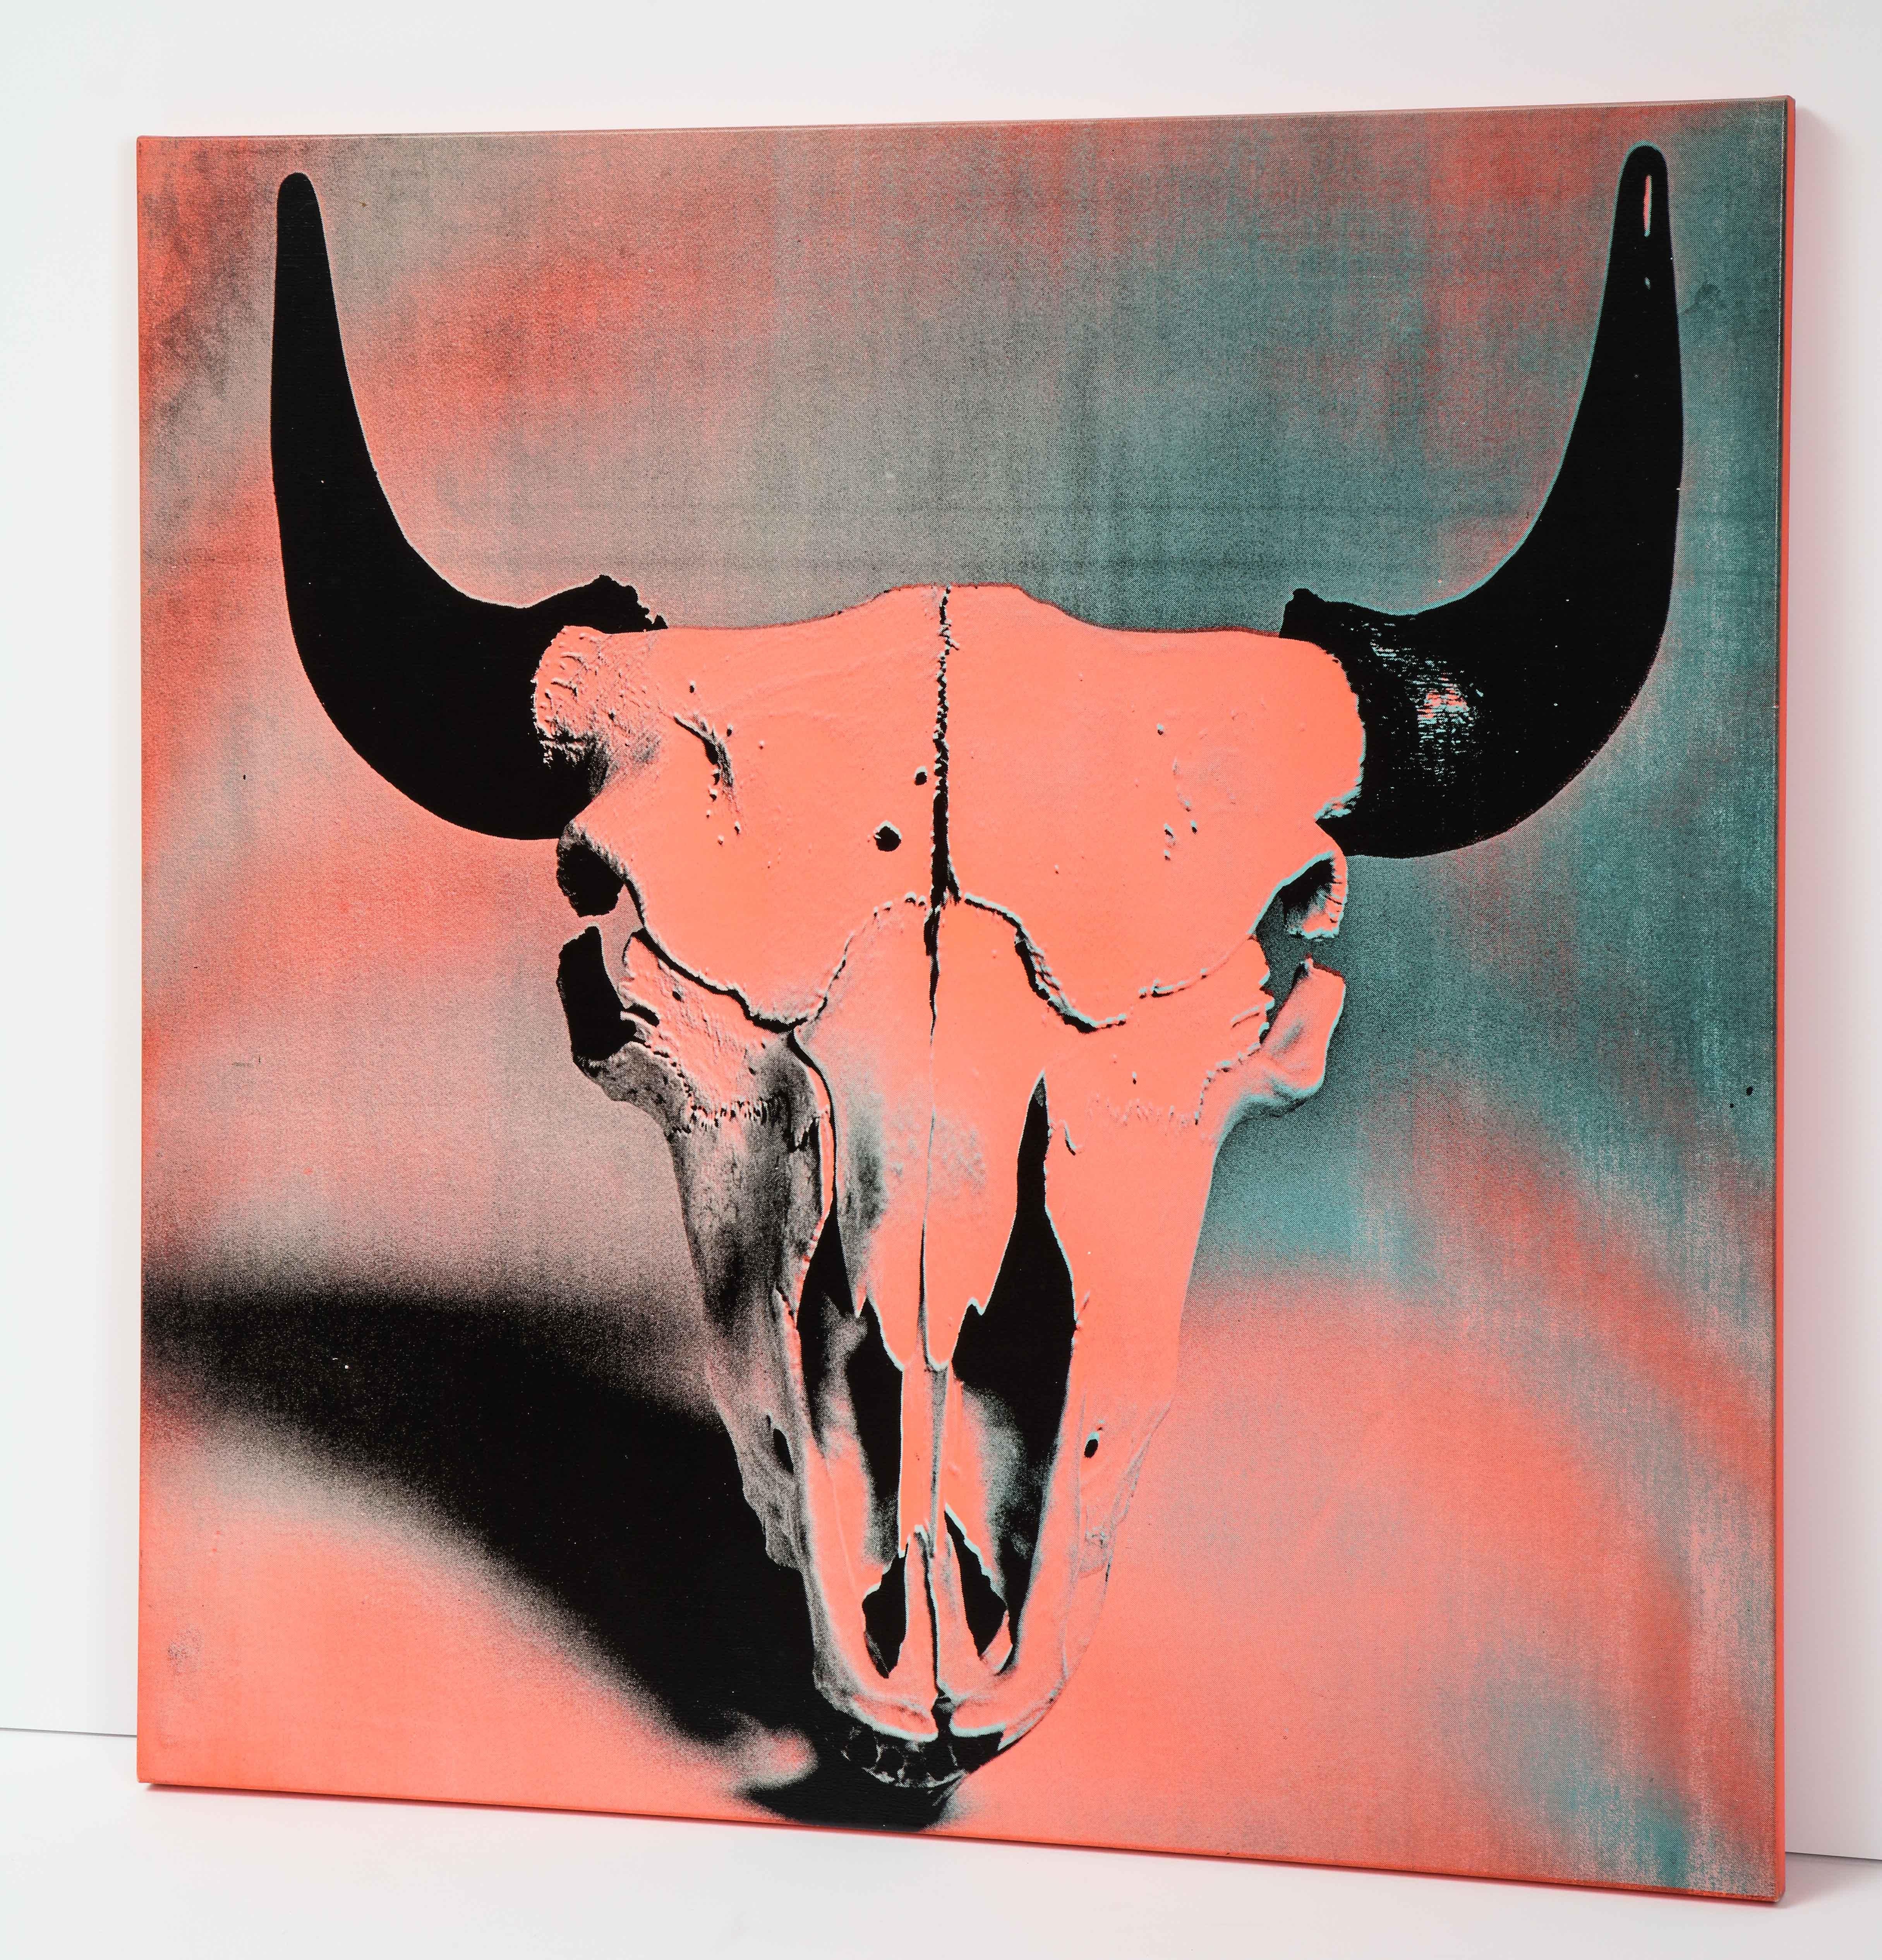 Francesco Scavullo cow skull, screenprint on canvas, coral, black, teal, signed. Screenprint in colors on canvas, signed and dated in ink on the reverse, 1985. Scavullo, 1921–2004, was an influential American fashion and celebrity photographer.